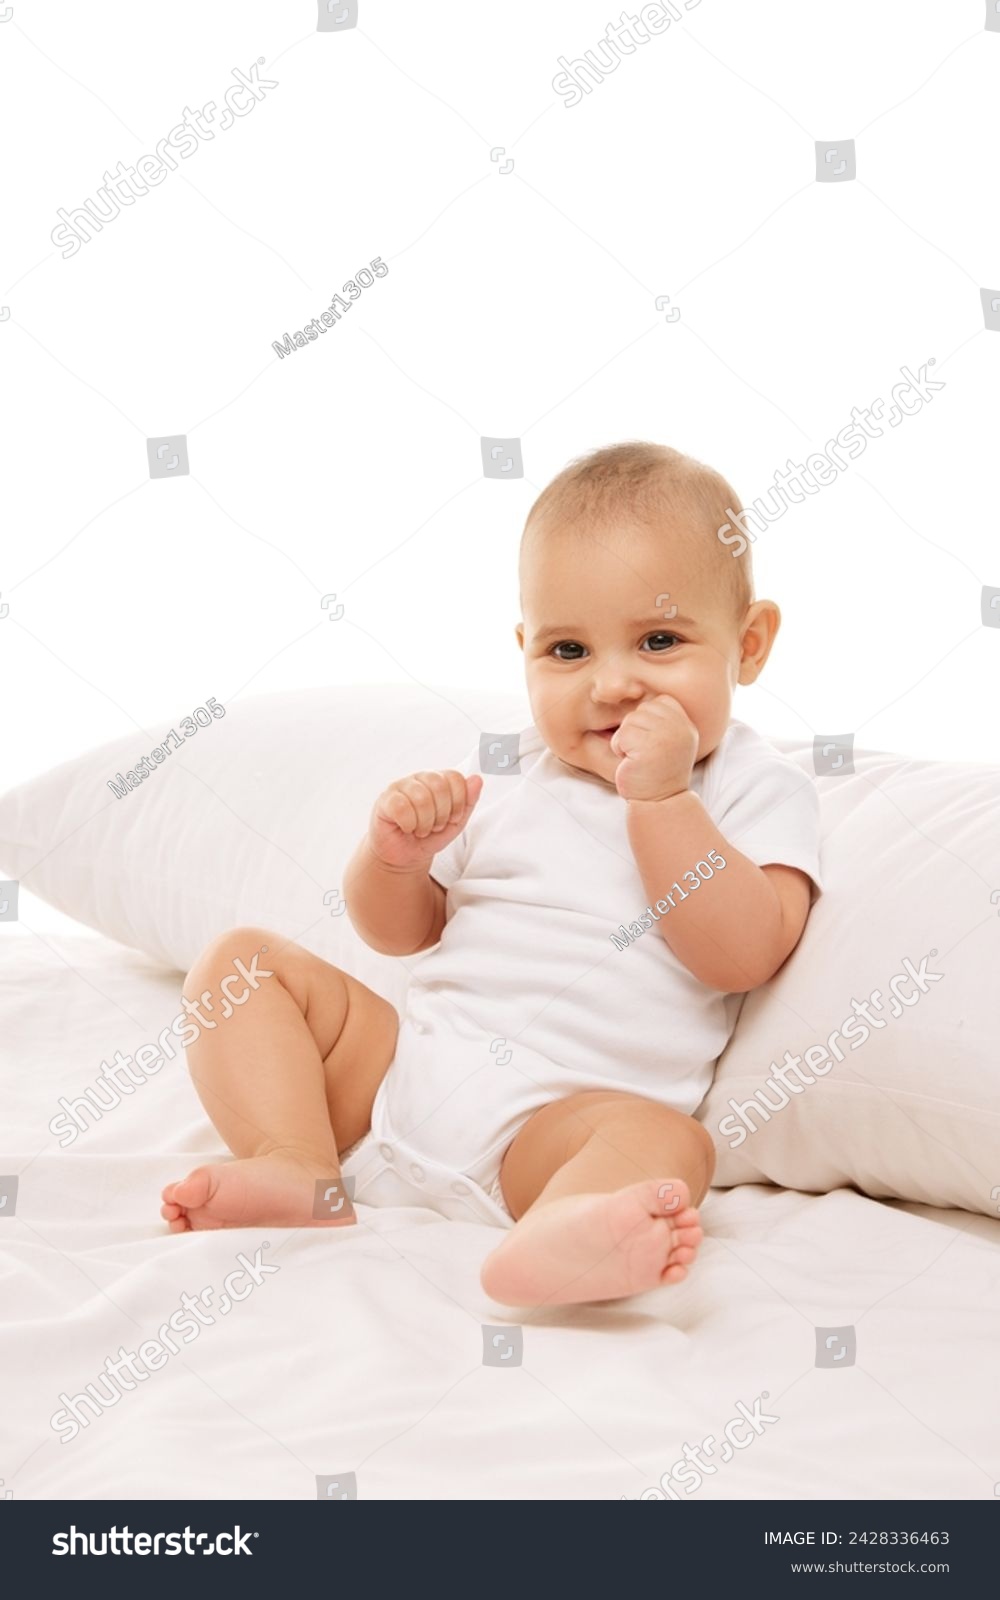 Portrait of beautiful little baby girl, toddler in onesie posing on bed against white background. Healthcare and education. Concept of childhood, family, care, motherhood, infancy, heath #2428336463